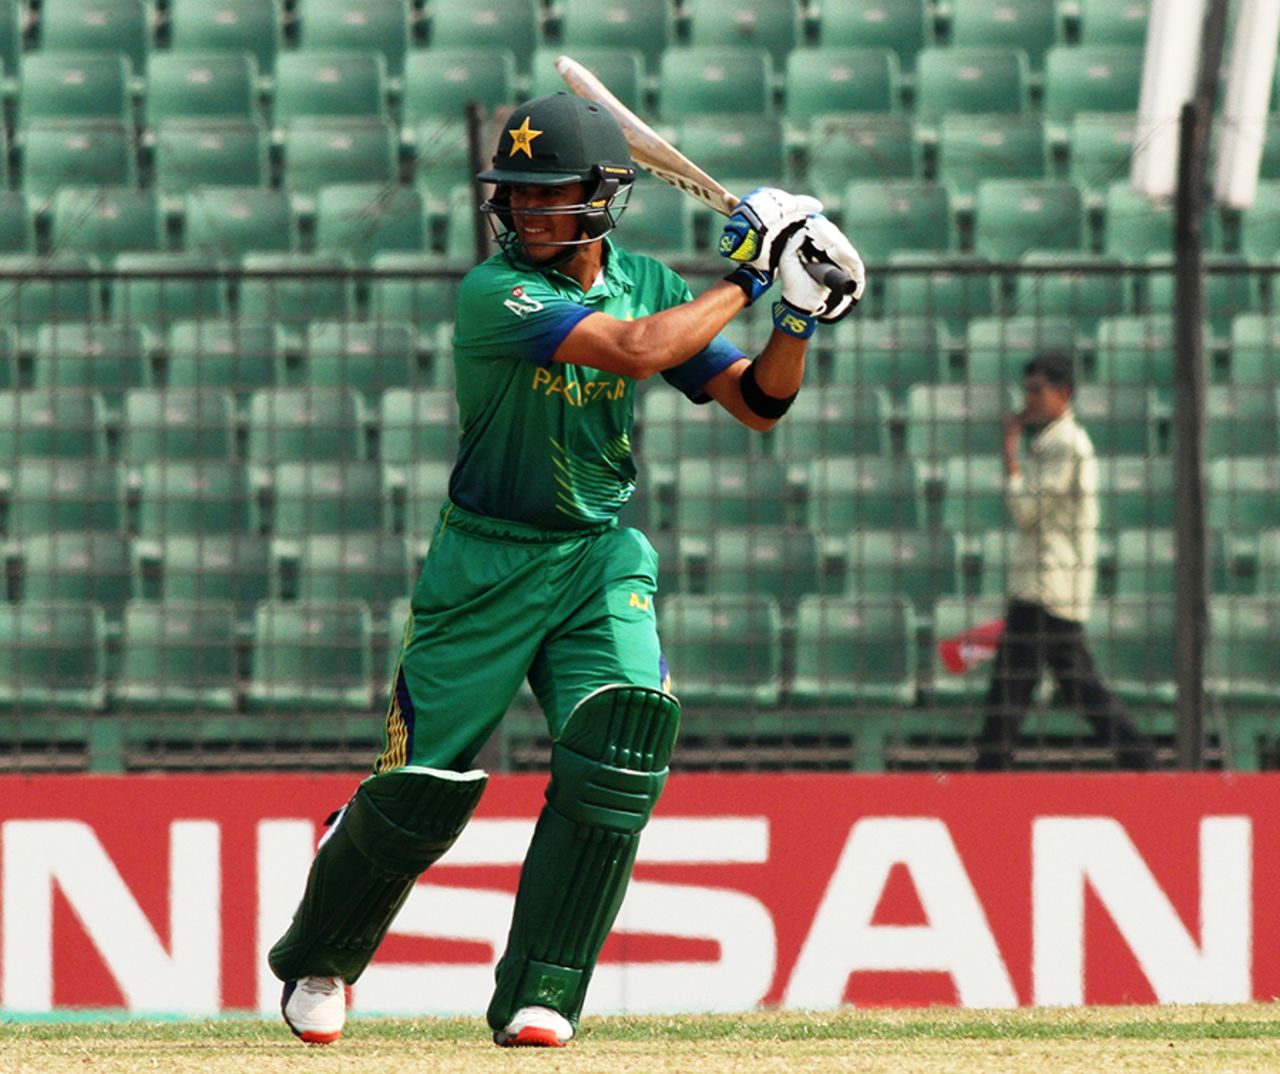 Umair Masood plays through the off side during his century, Pakistan v West Indies, Under-19 World Cup 2016, quarter-final, Fatullah, February 8, 2016